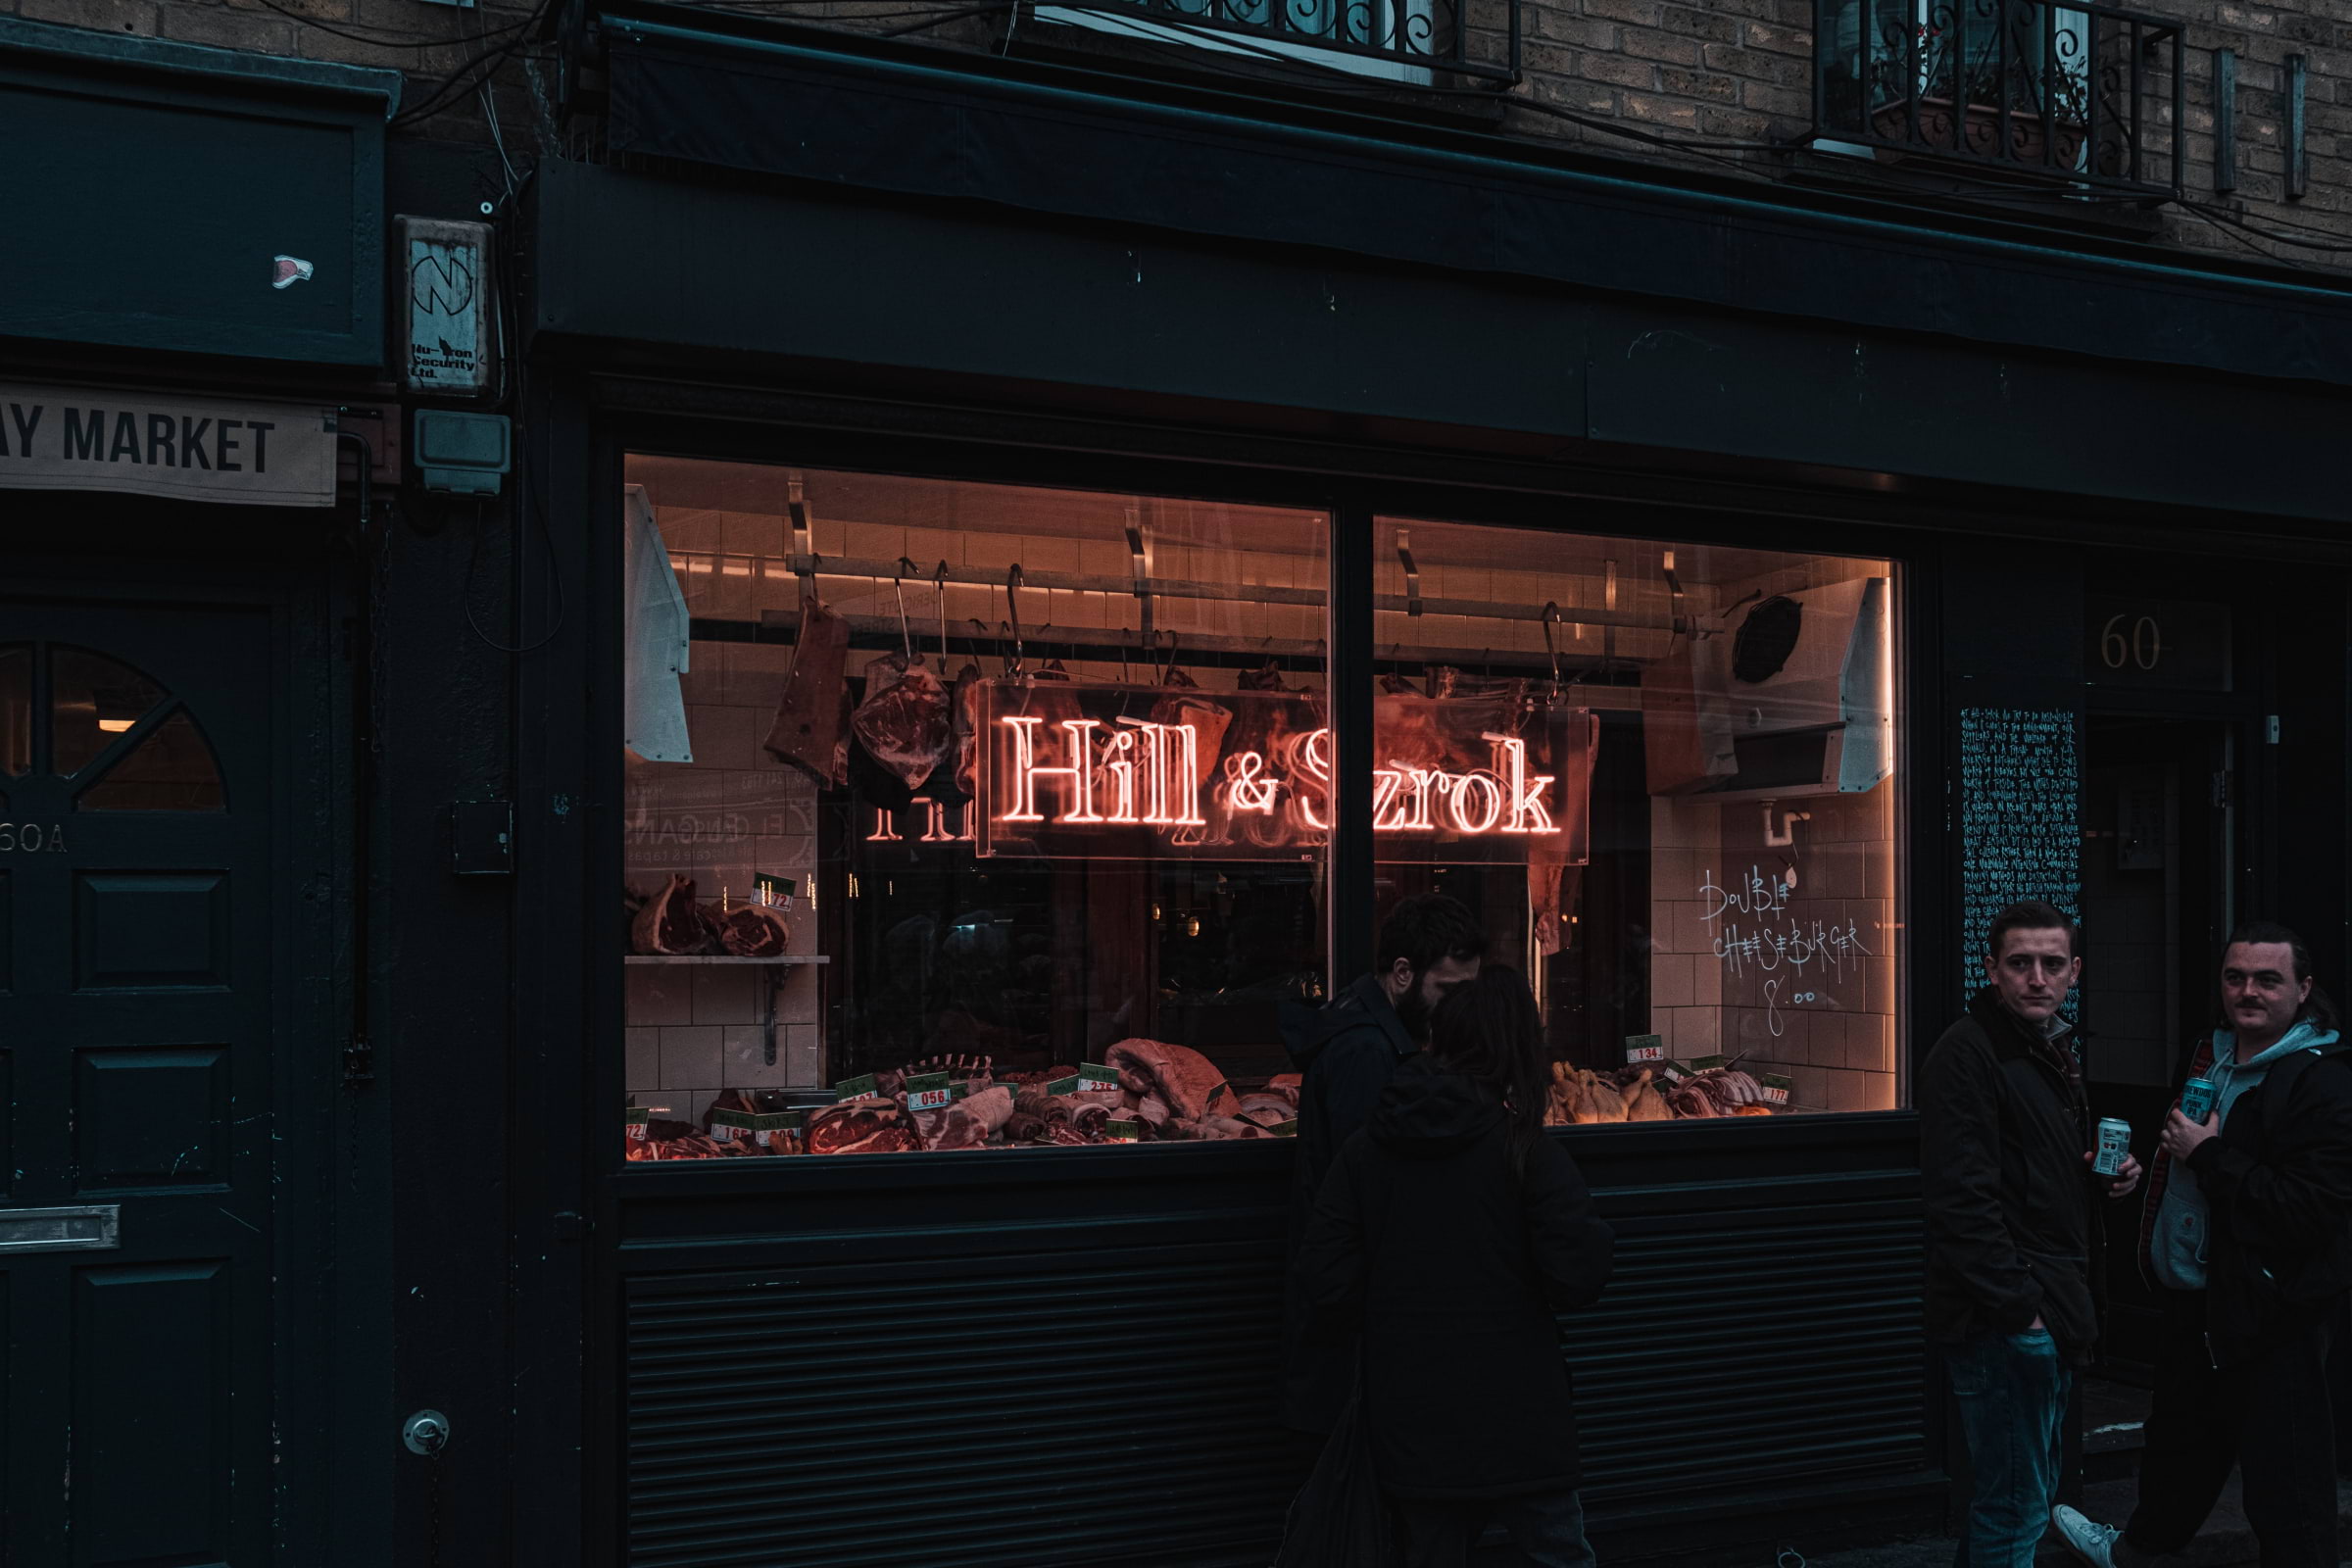 Guide to shopping in Broadway Market